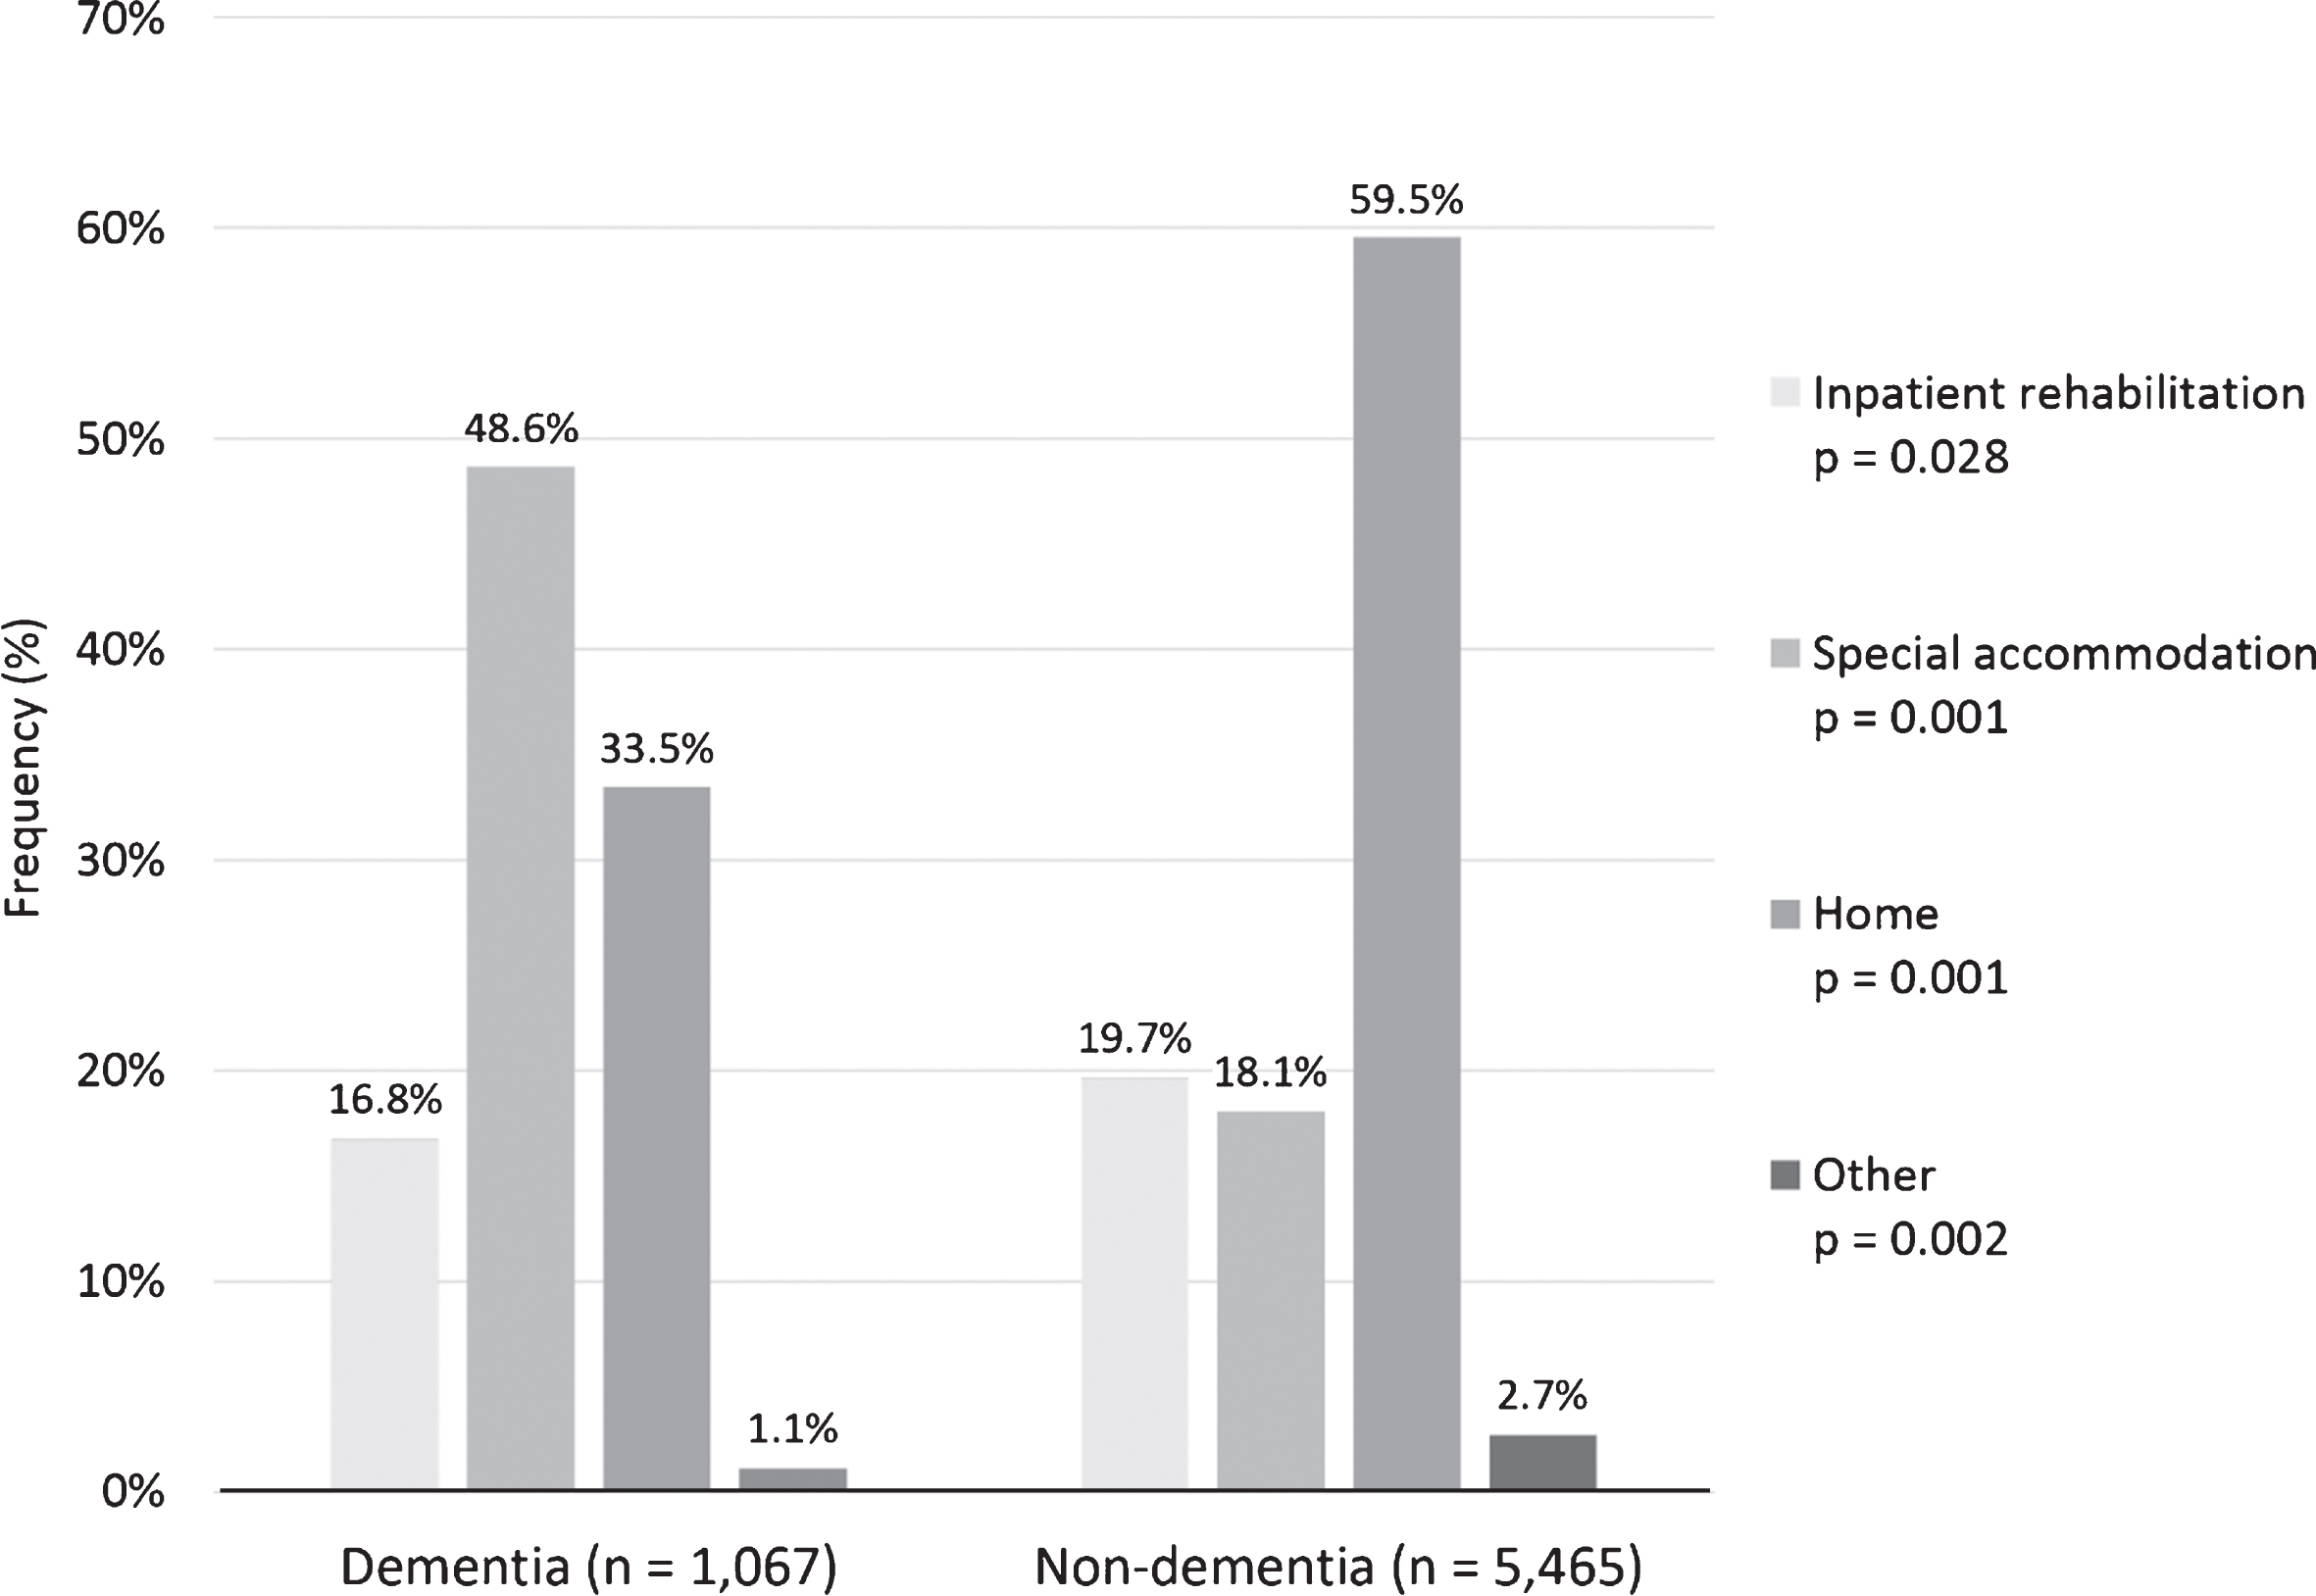 Discharge place after acute stroke care between dementia and non-dementia patients (n = 7,383; missing values n (%): dementia 154 (12.6), non-dementia 697 (11.3)). P-values for the difference between dementia and non-dementia patients.